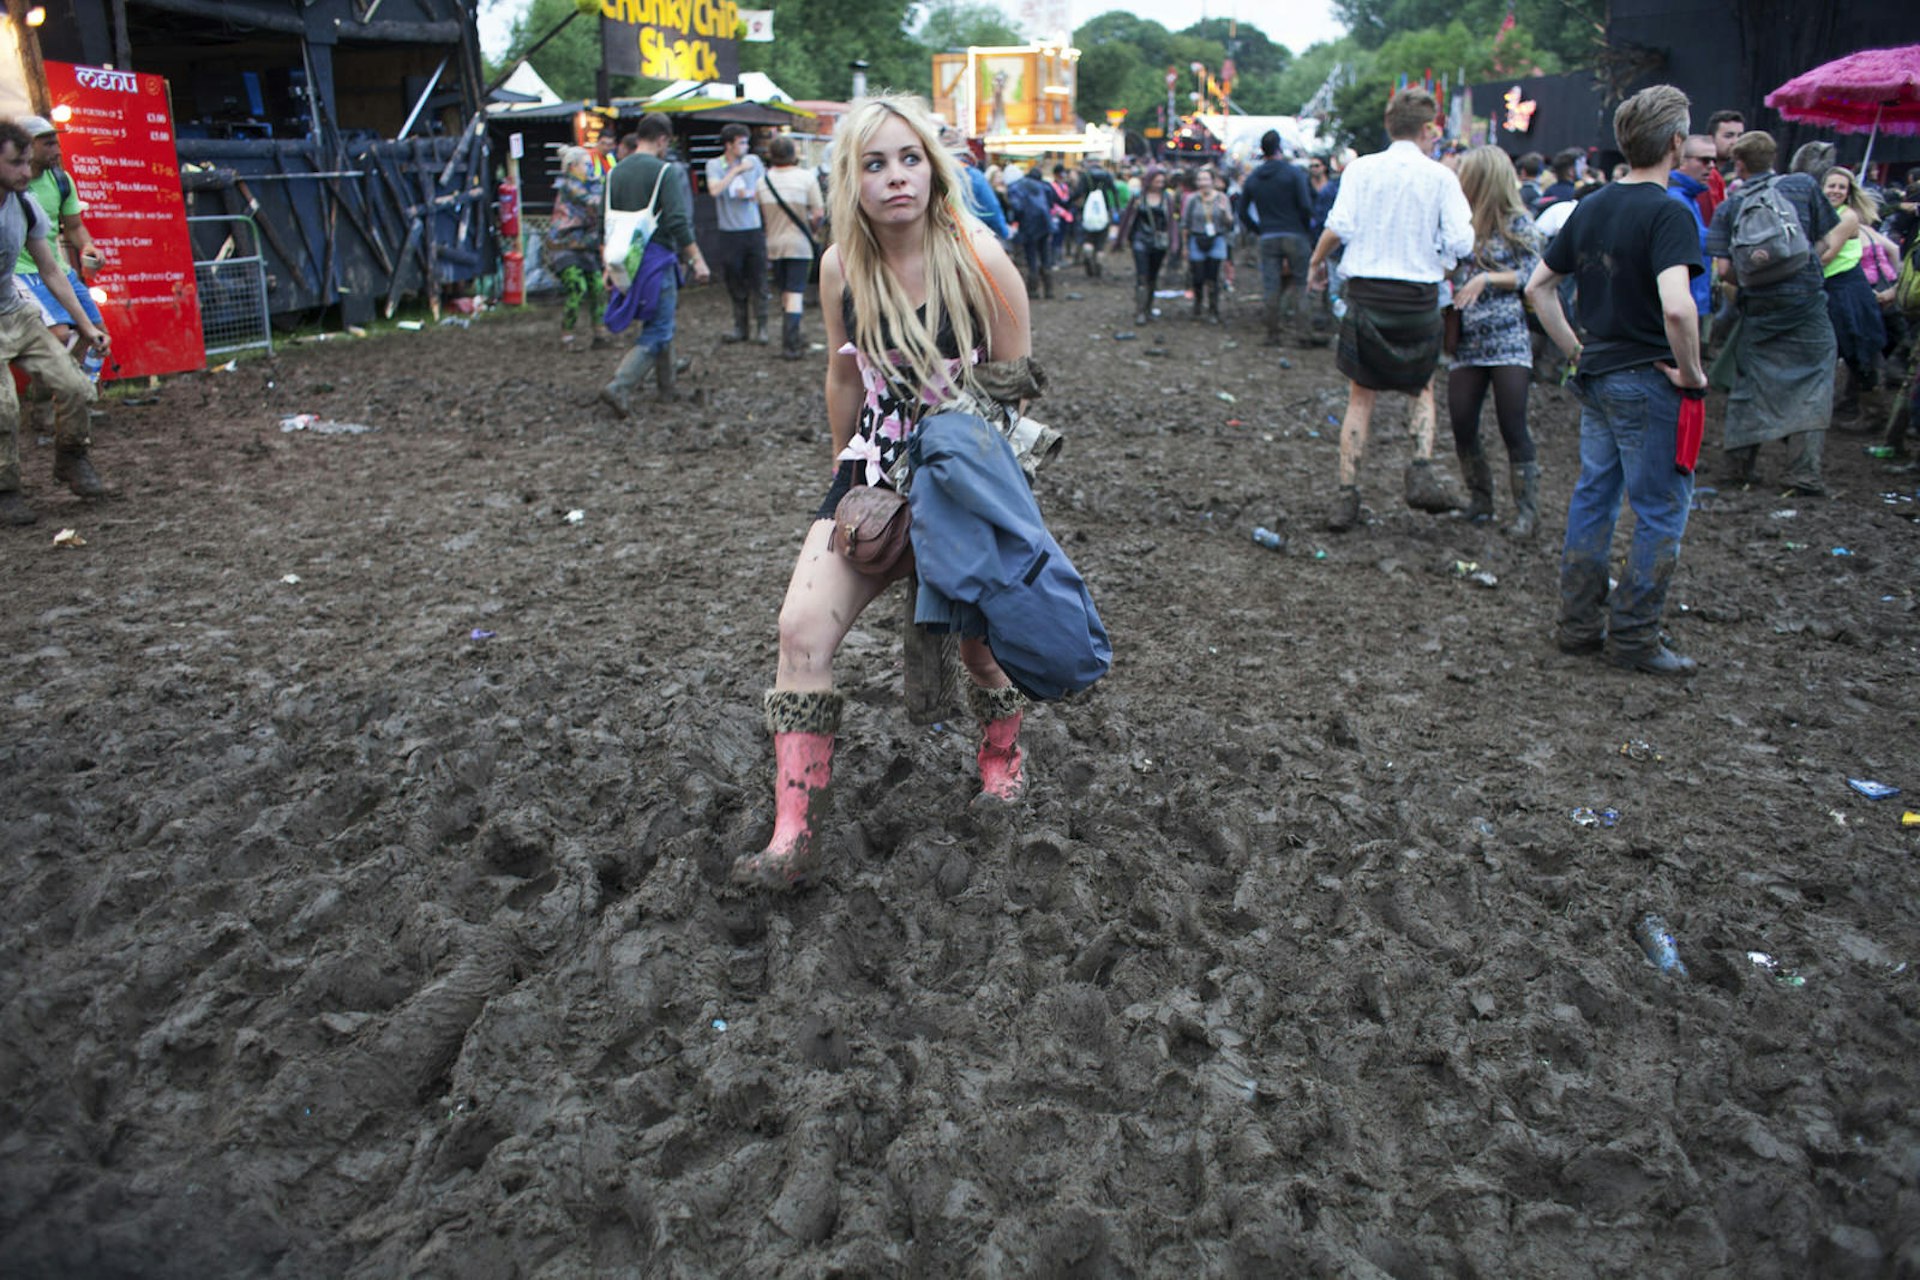 The scene in the Shangri-La section of the Glastonbury after a long night of dancing. Revellers make their way through the mud. A blonde woman sporting pink wellies with leopard trim is happily wading through